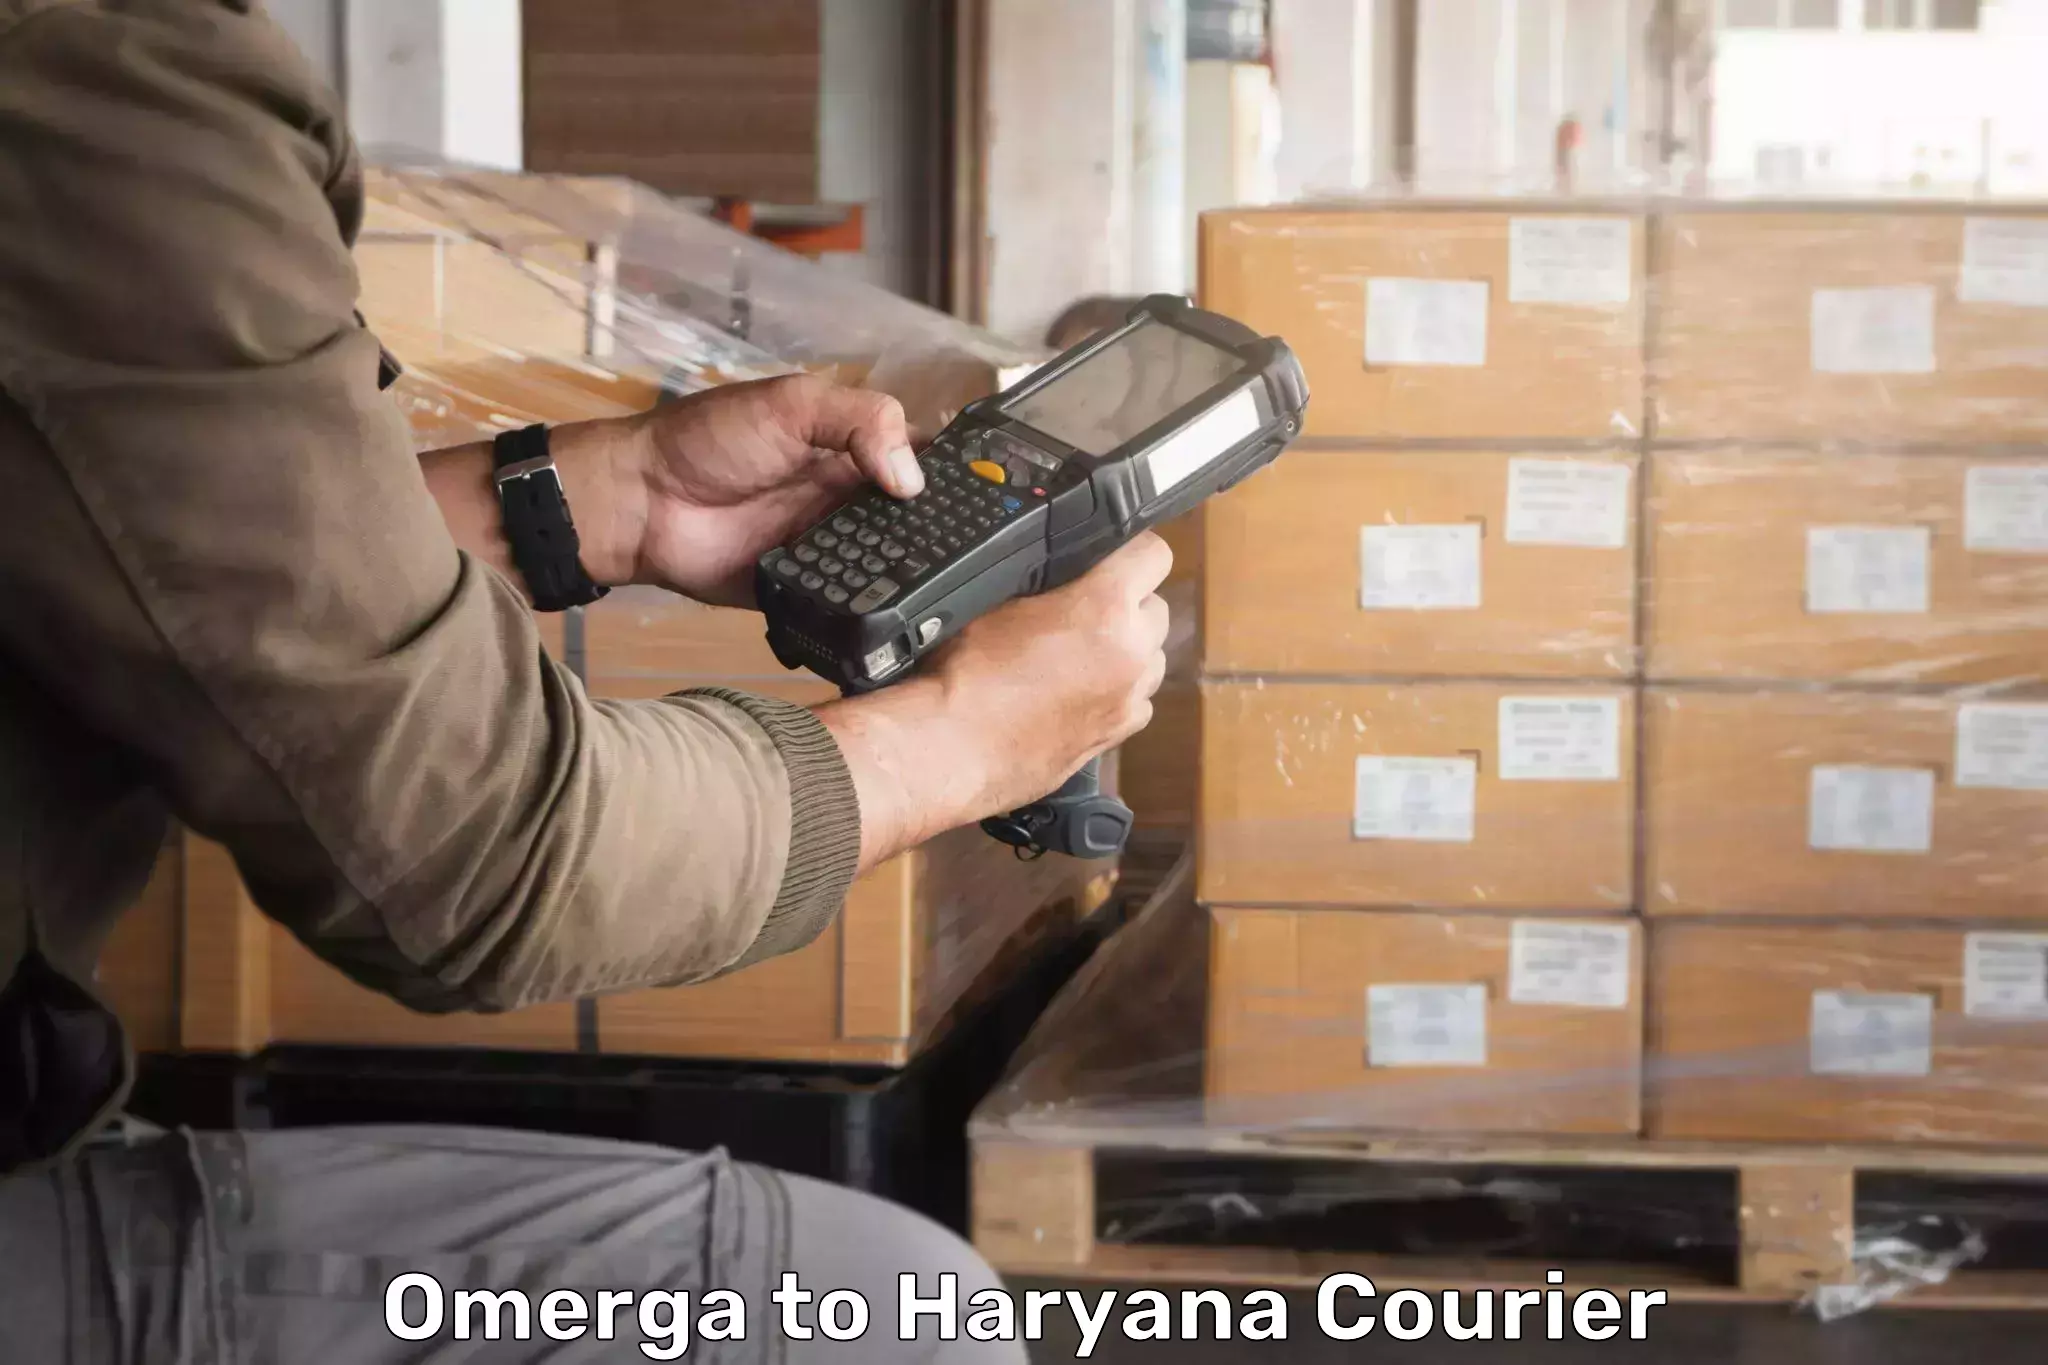 User-friendly delivery service Omerga to Chaudhary Charan Singh Haryana Agricultural University Hisar